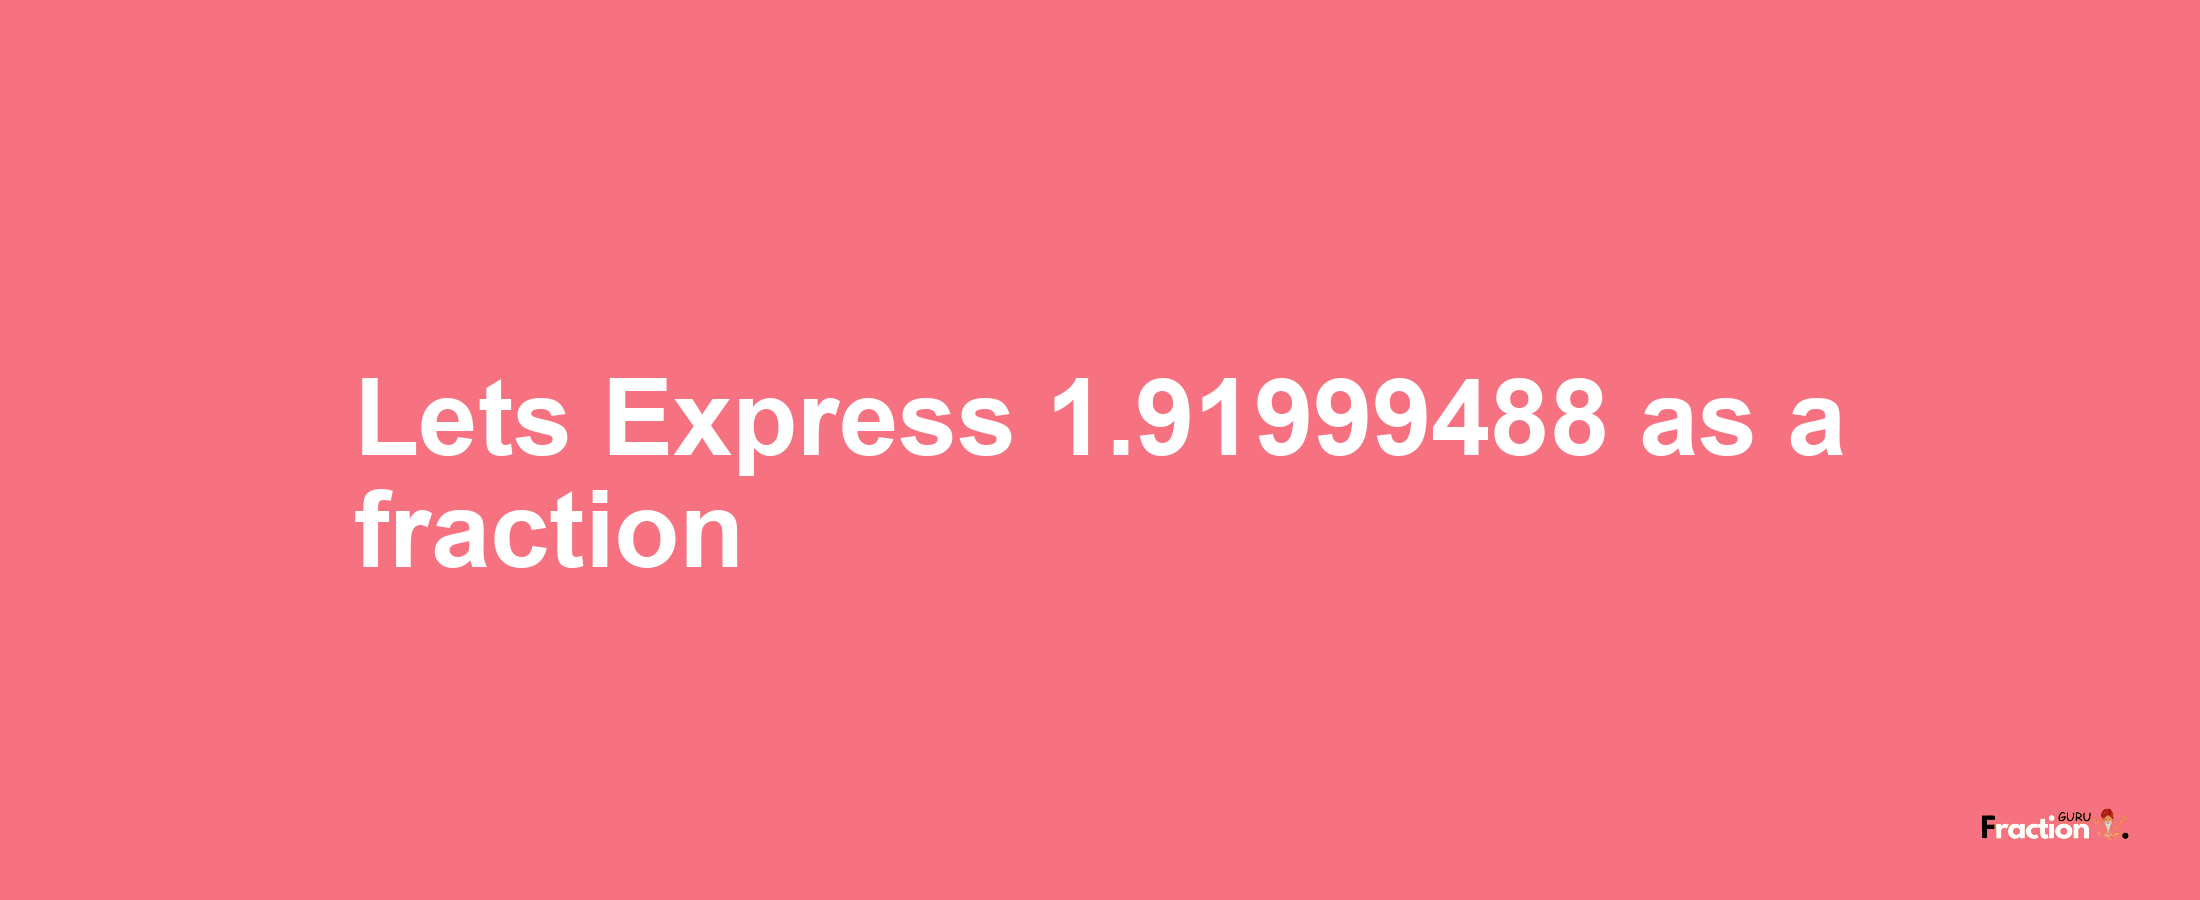 Lets Express 1.91999488 as afraction